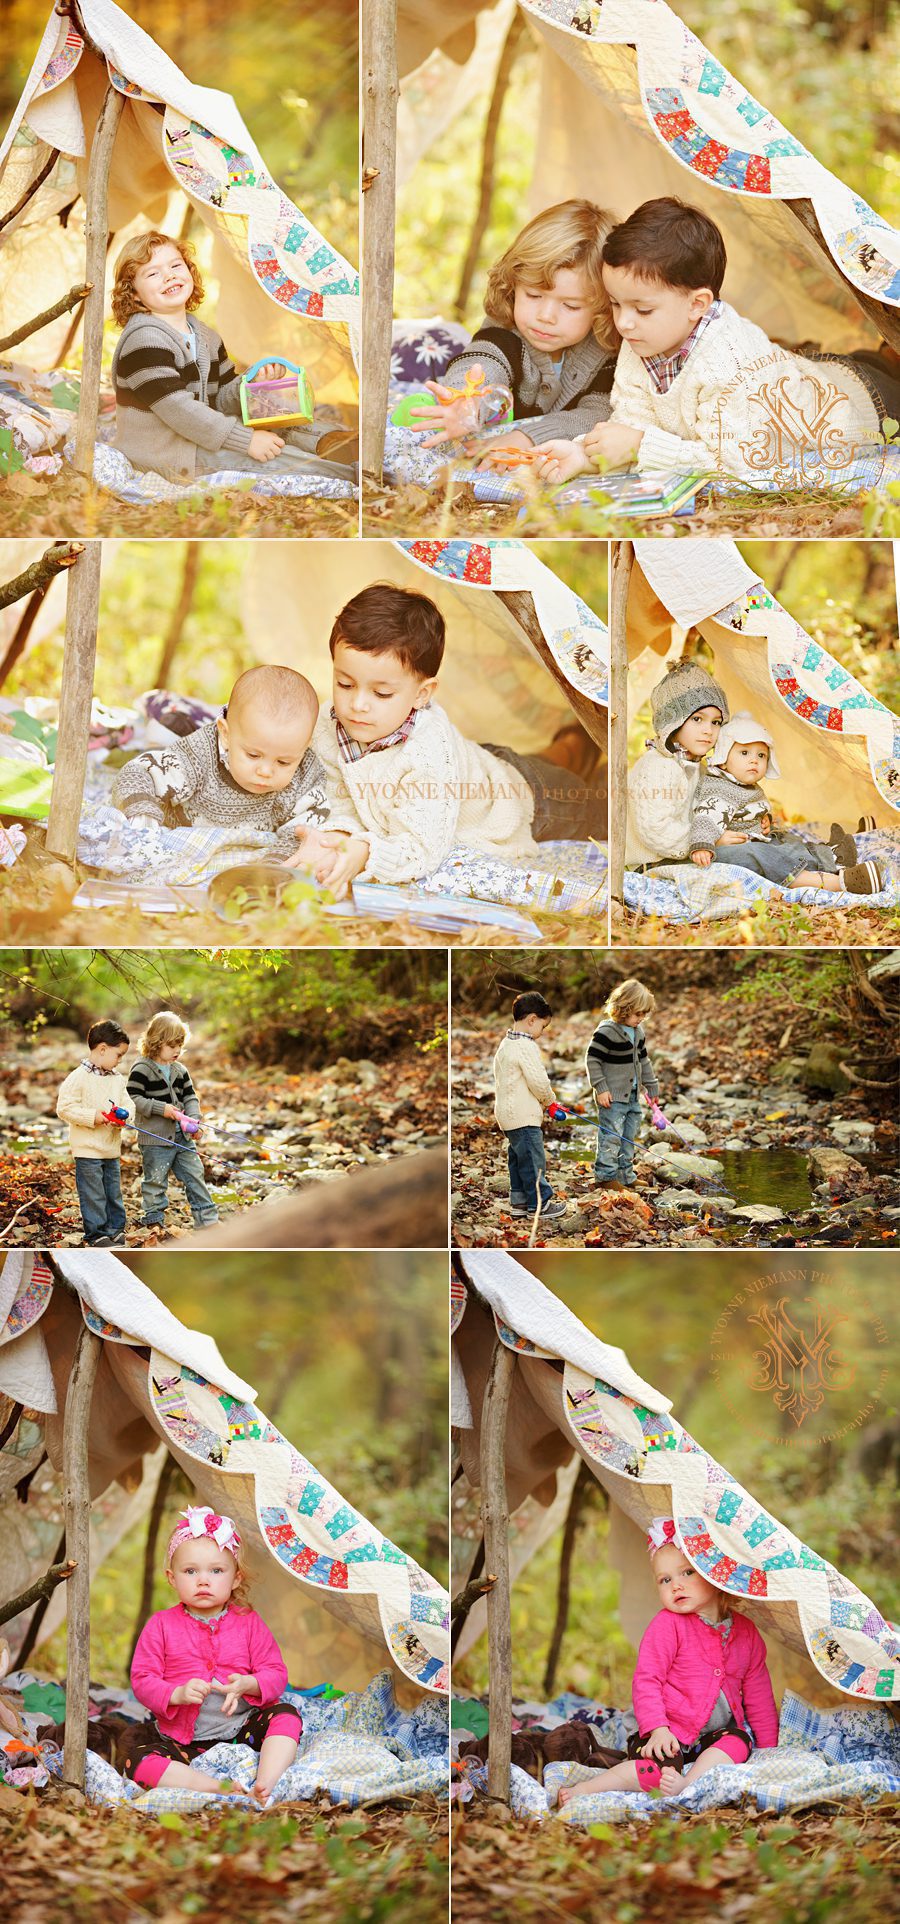 Fall St. Louis Children's Portraits Outdoors by Yvonne Niemann Photography